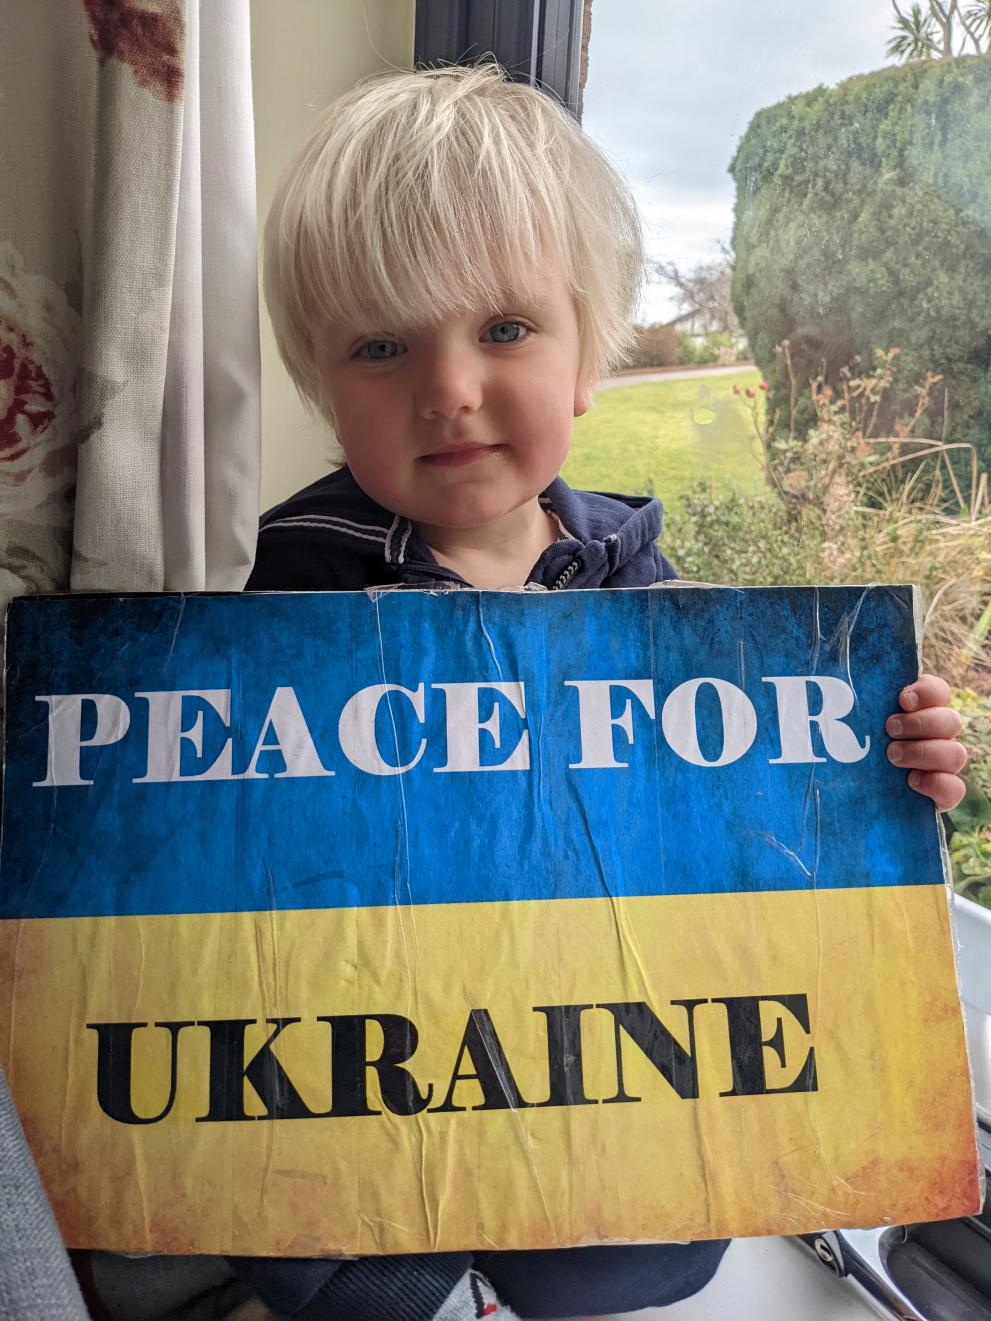 A 2 year-old Irish girl with Ukrainian roots, holding a protest poster that says "Peace for Ukraine".